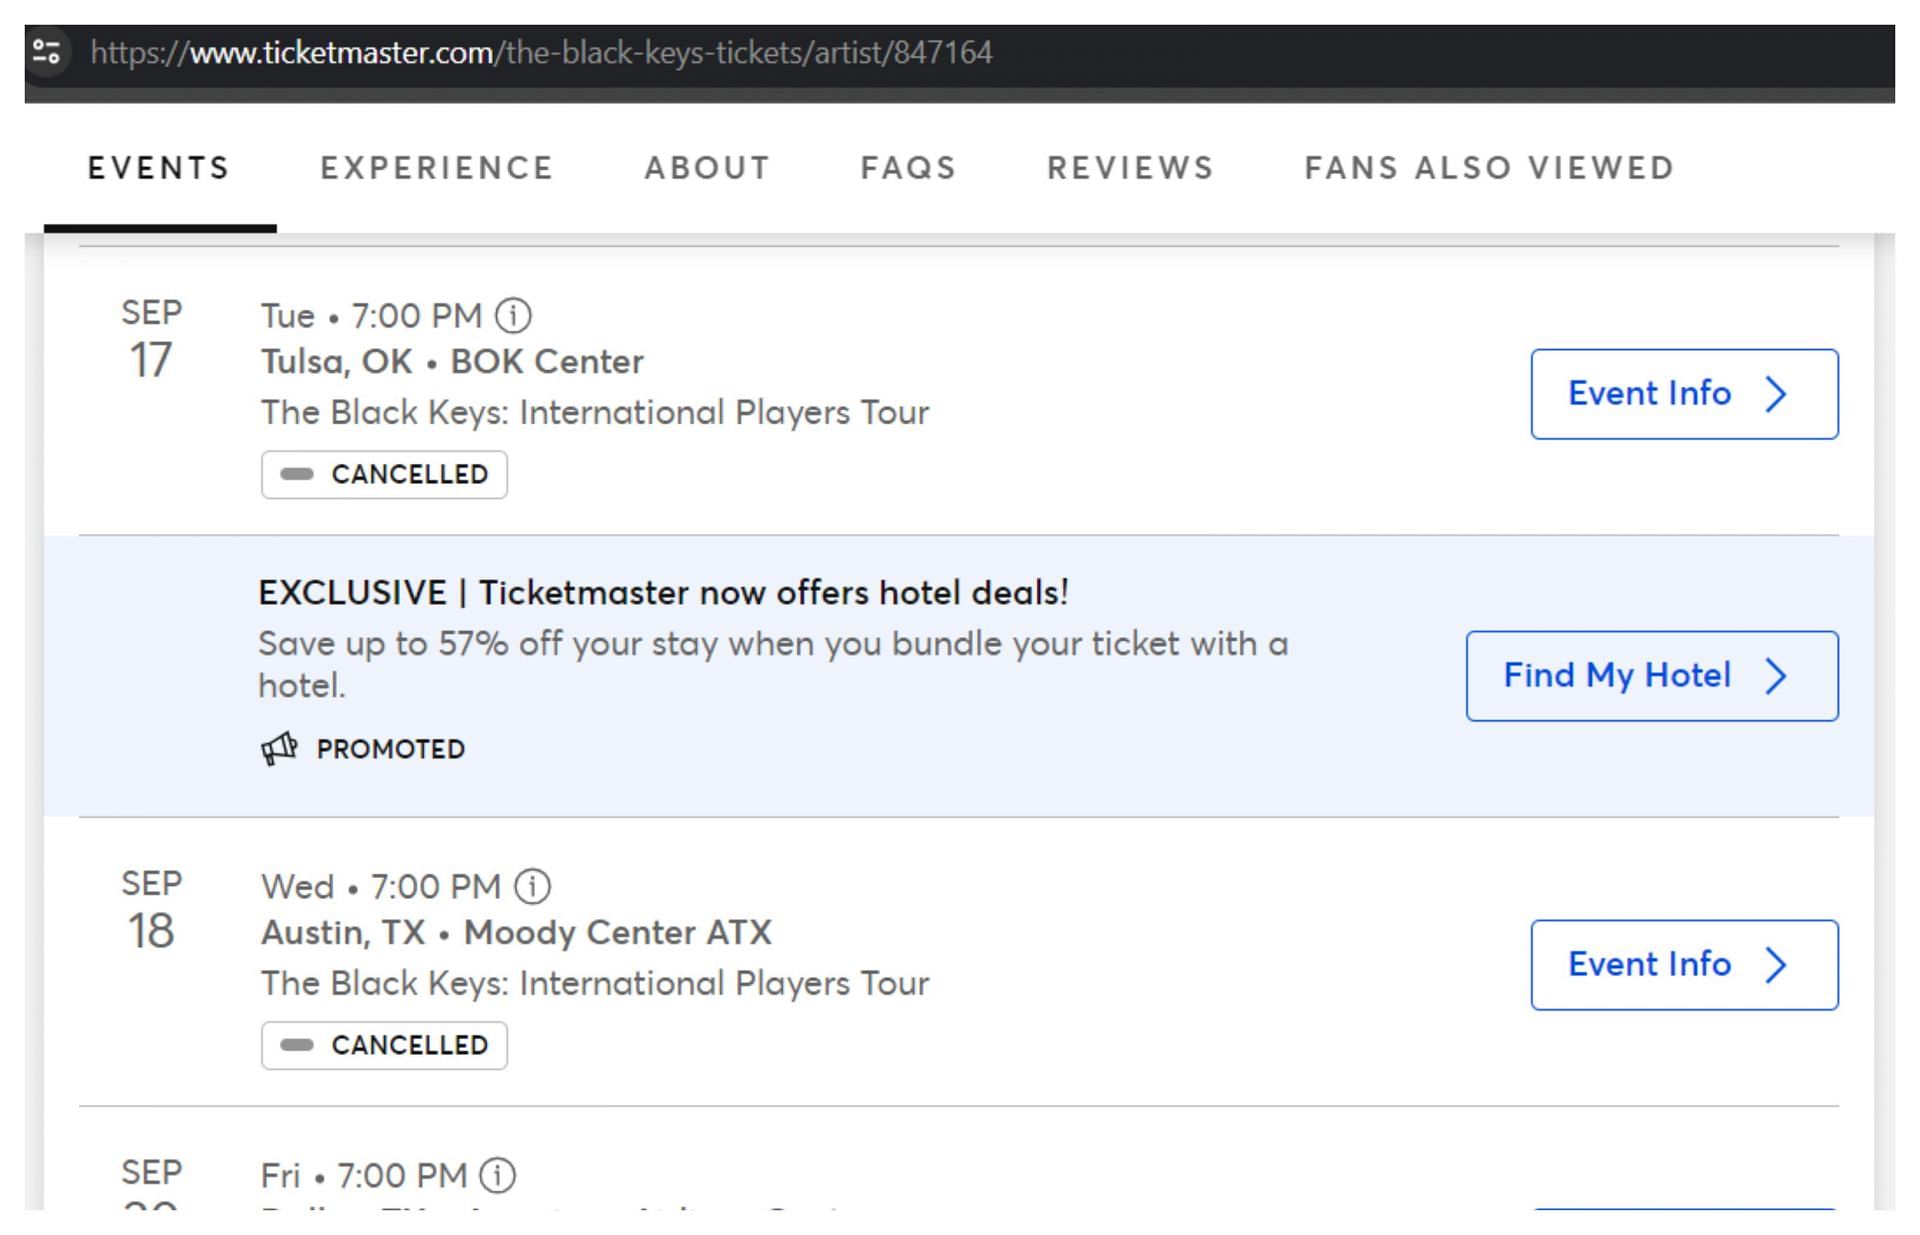 Ticketmaster page screenshot showing the cancelled The Black Keys tour dates (image via official website @Ticketmaster.com)